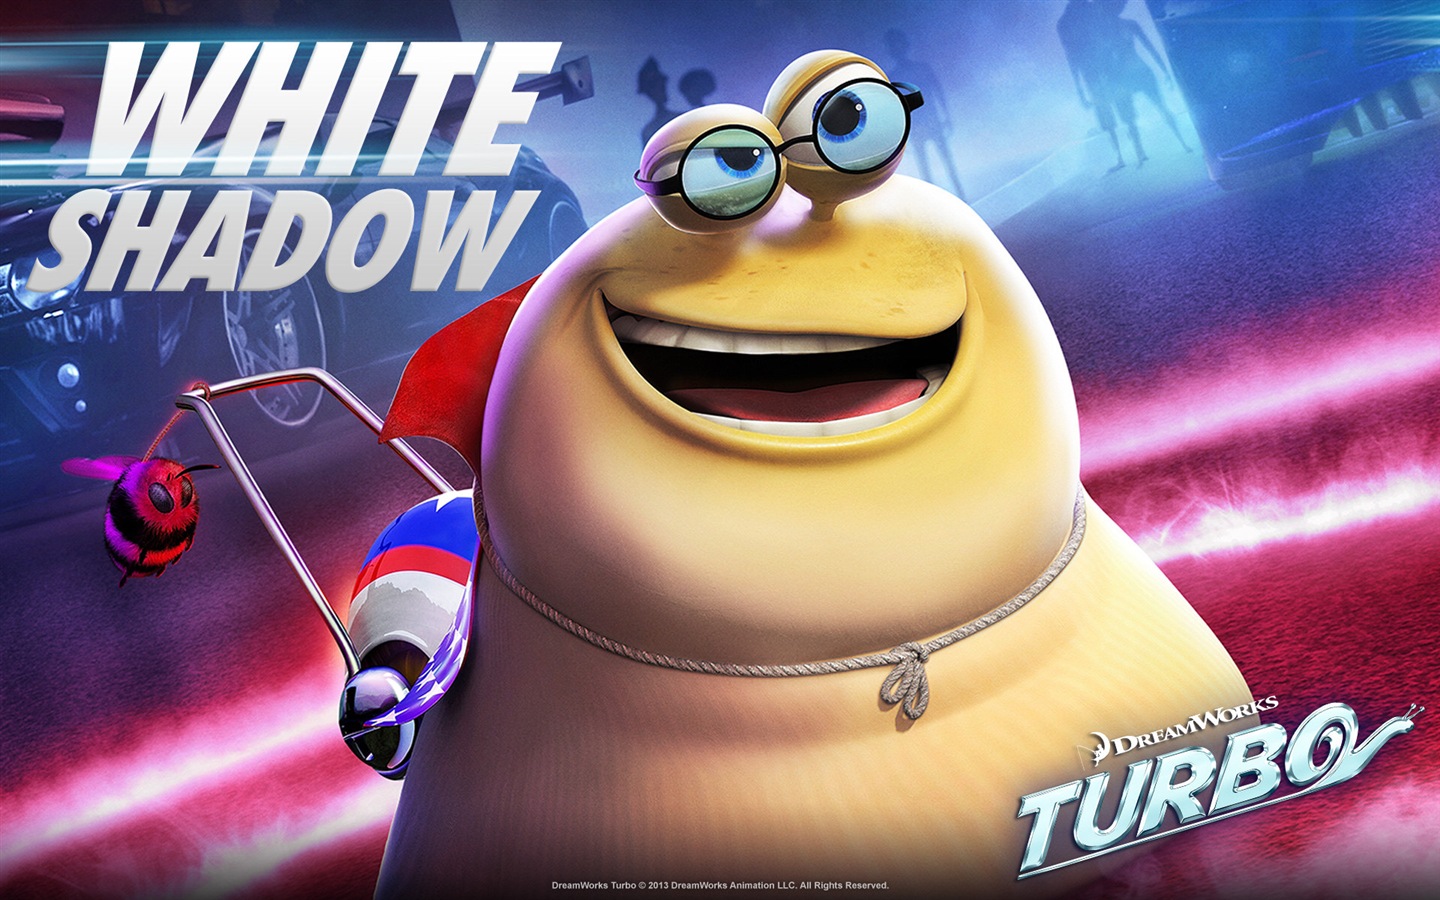 Turbo 3D movie HD wallpapers #8 - 1440x900